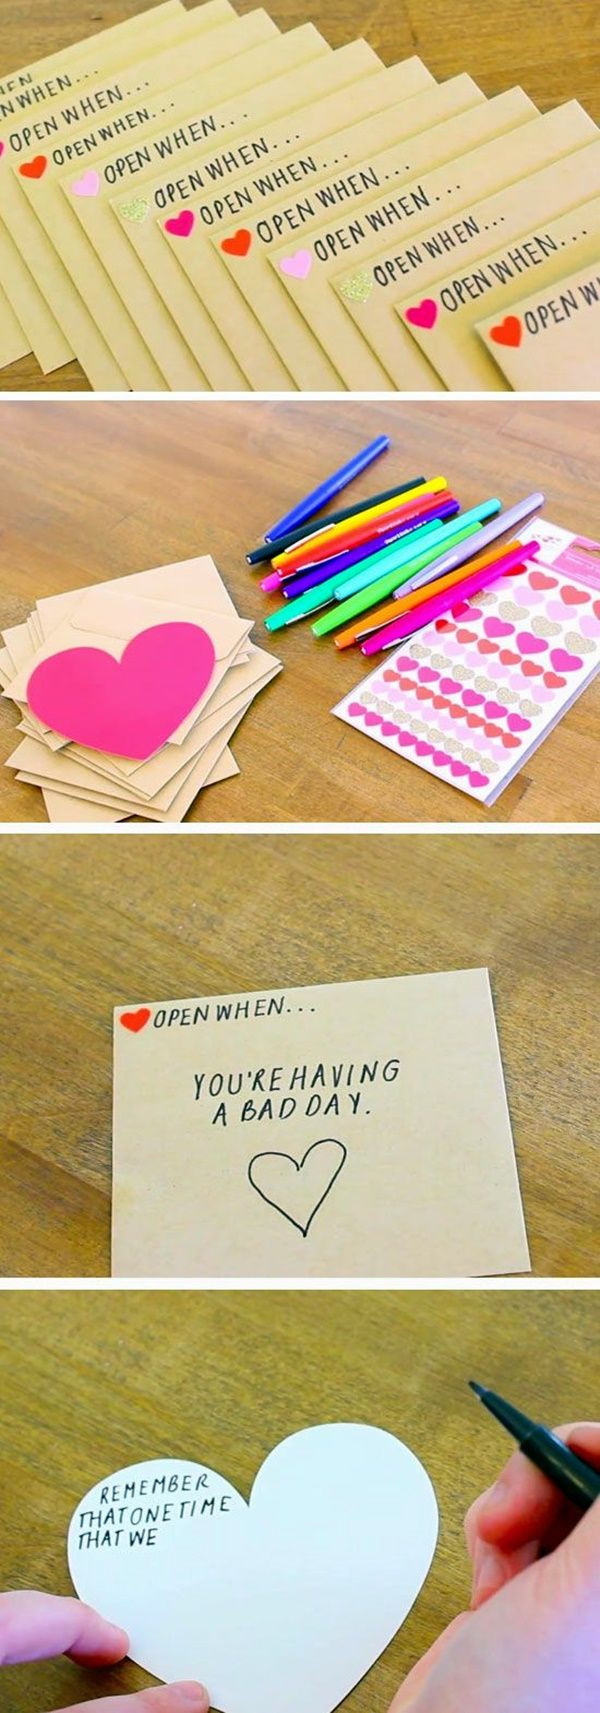 Cute Valentines Day Ideas For Him
 101 Homemade Valentines Day Ideas for Him that re really